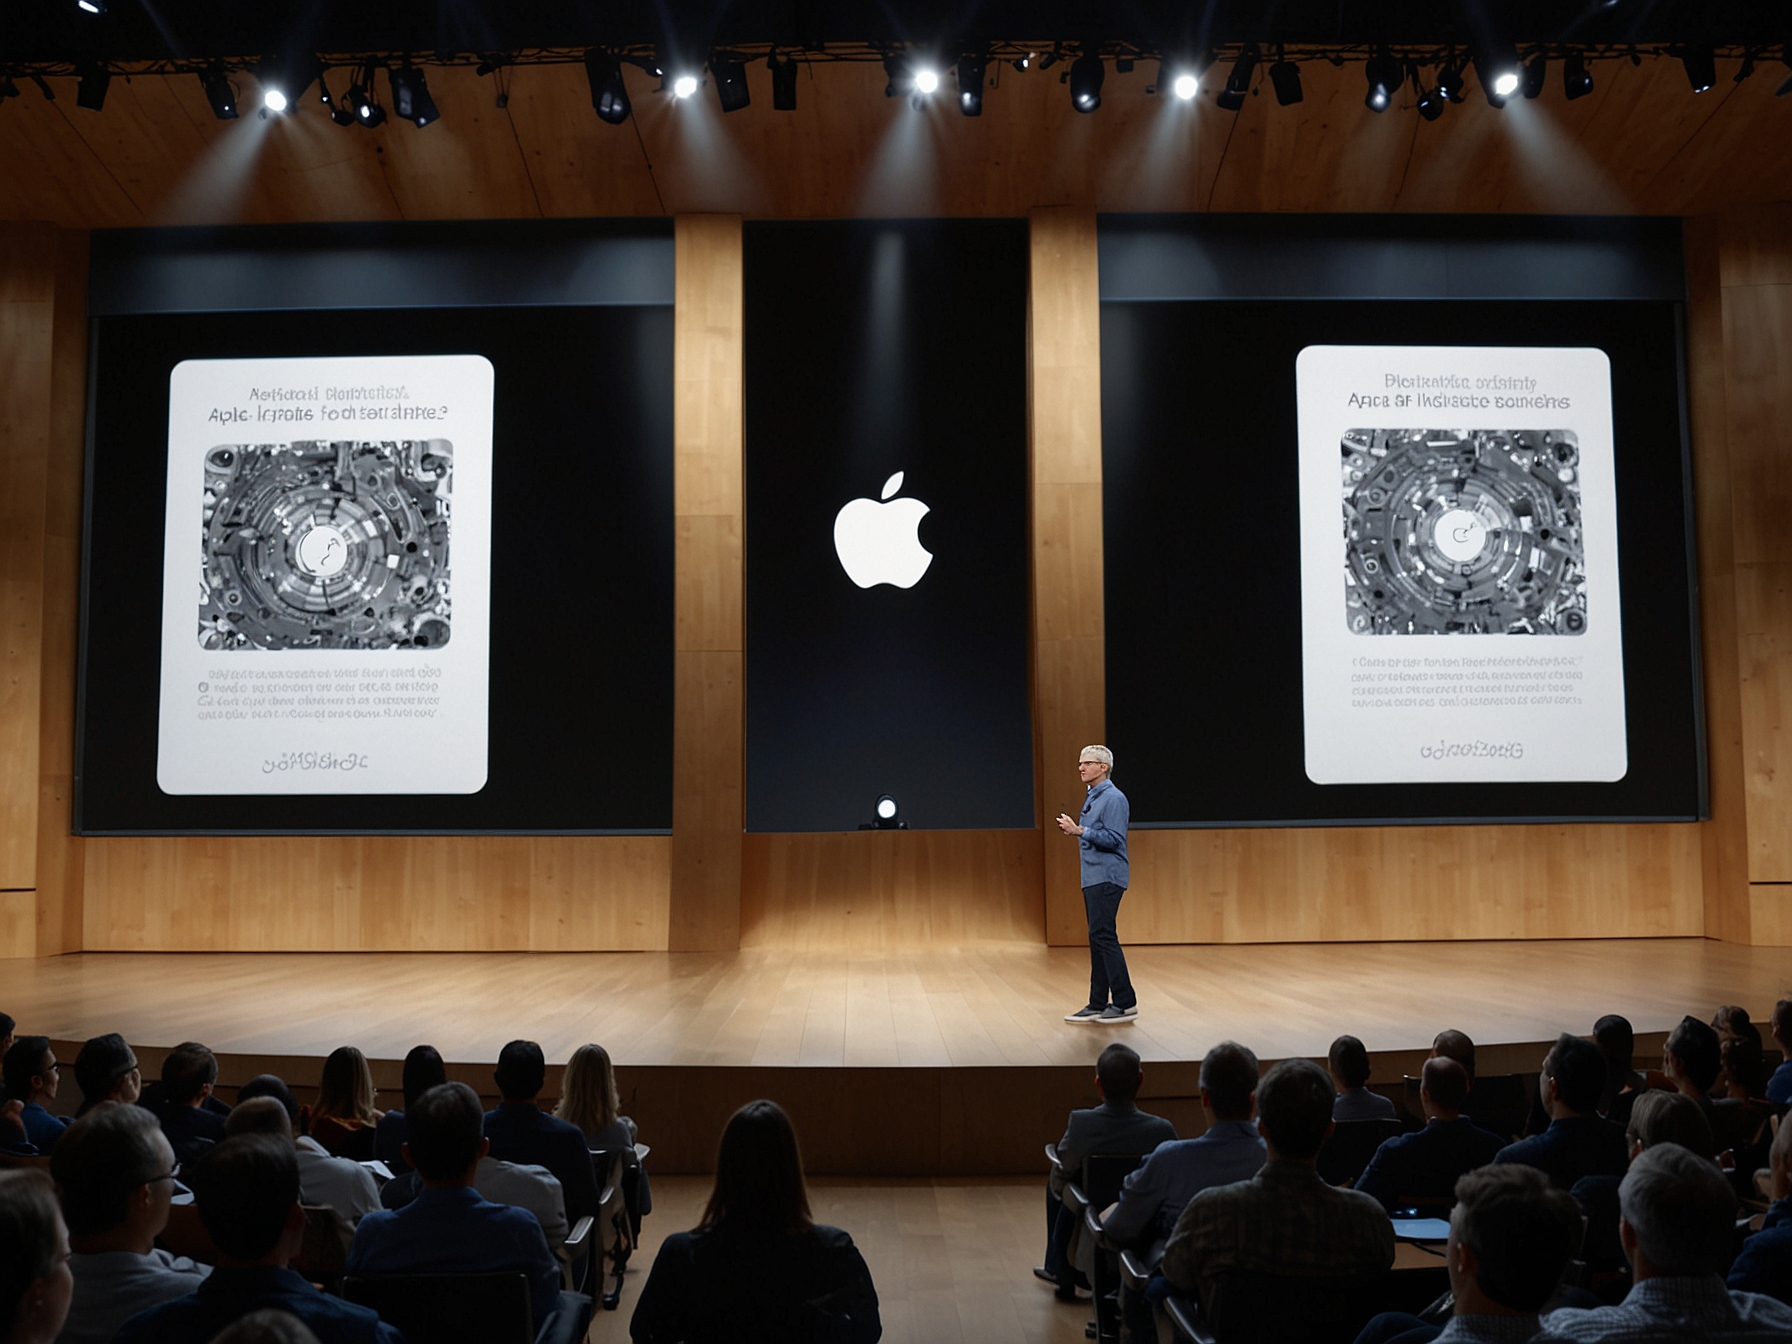 Apple CEO presenting the Apple Intelligence AI suite at WWDC, highlighting features like text summarization and AI-powered image generation, reflecting its ambitious global launch plans.